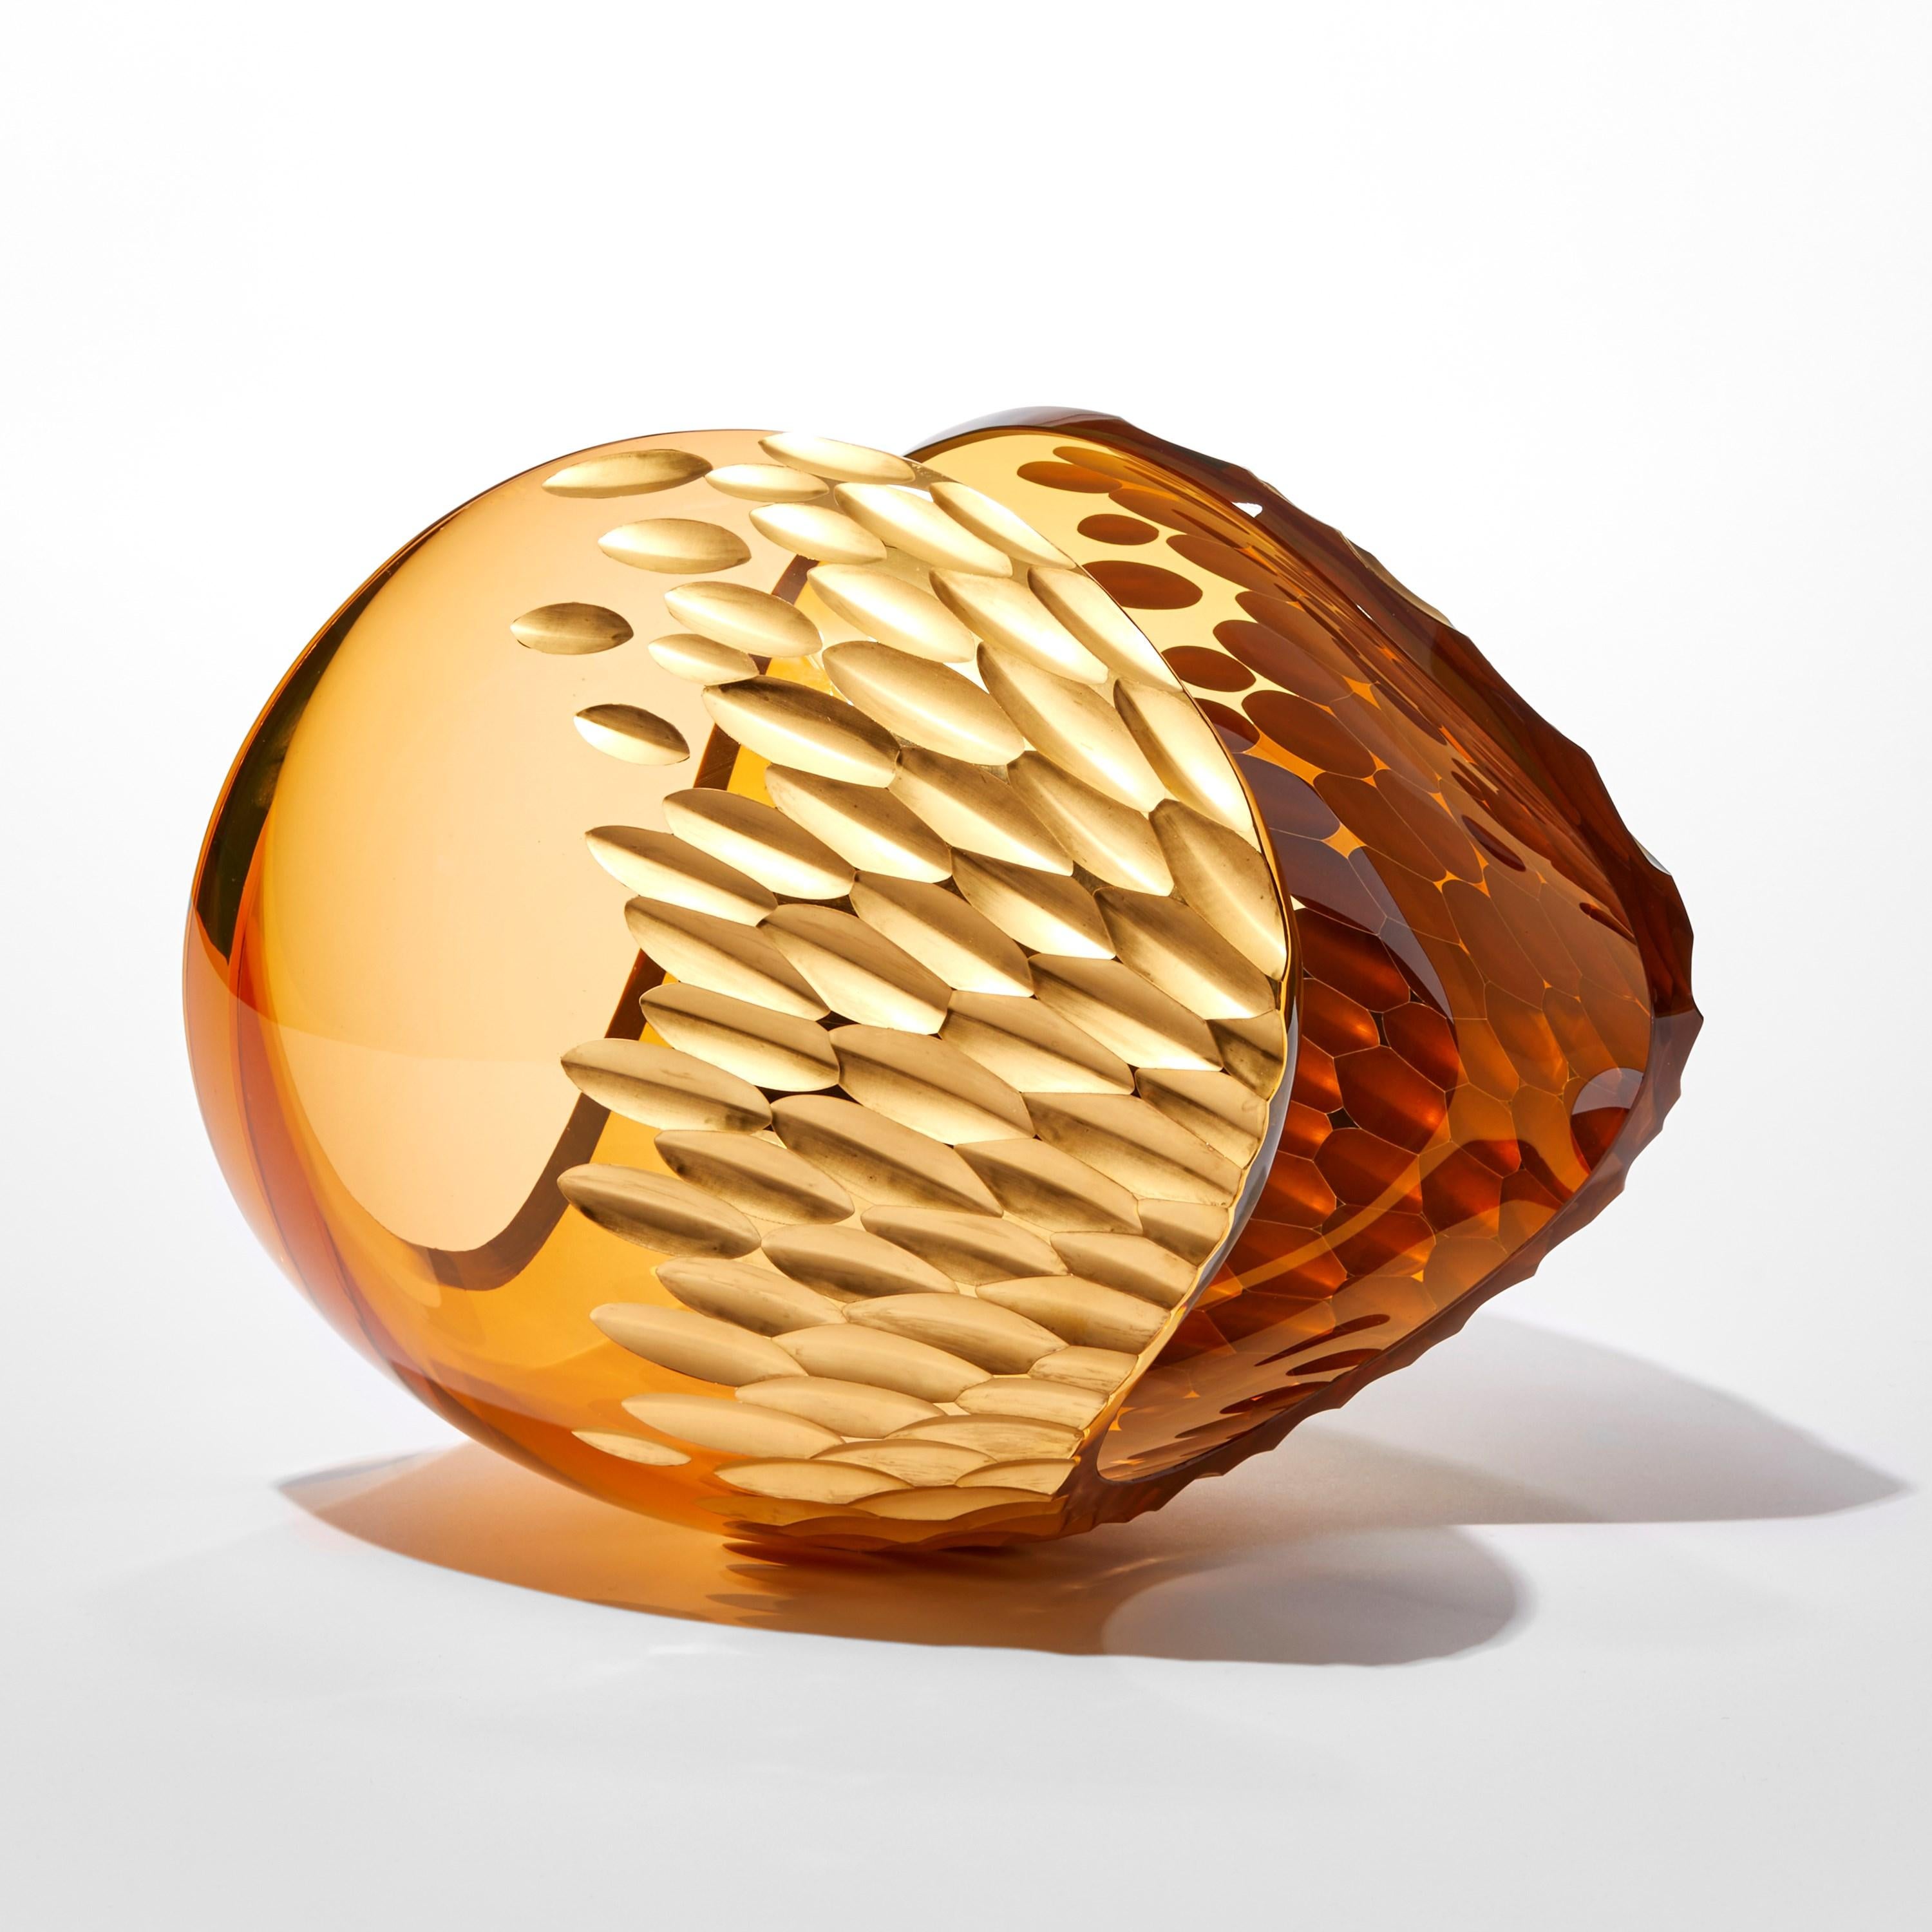 'Planet in Amber Gold' is a unique artwork by the Swedish artist and designer, Lena Bergström. It is from an ongoing collection of works called 'Planets', which Bergström has revisited several times throughout her extensive and highly revered